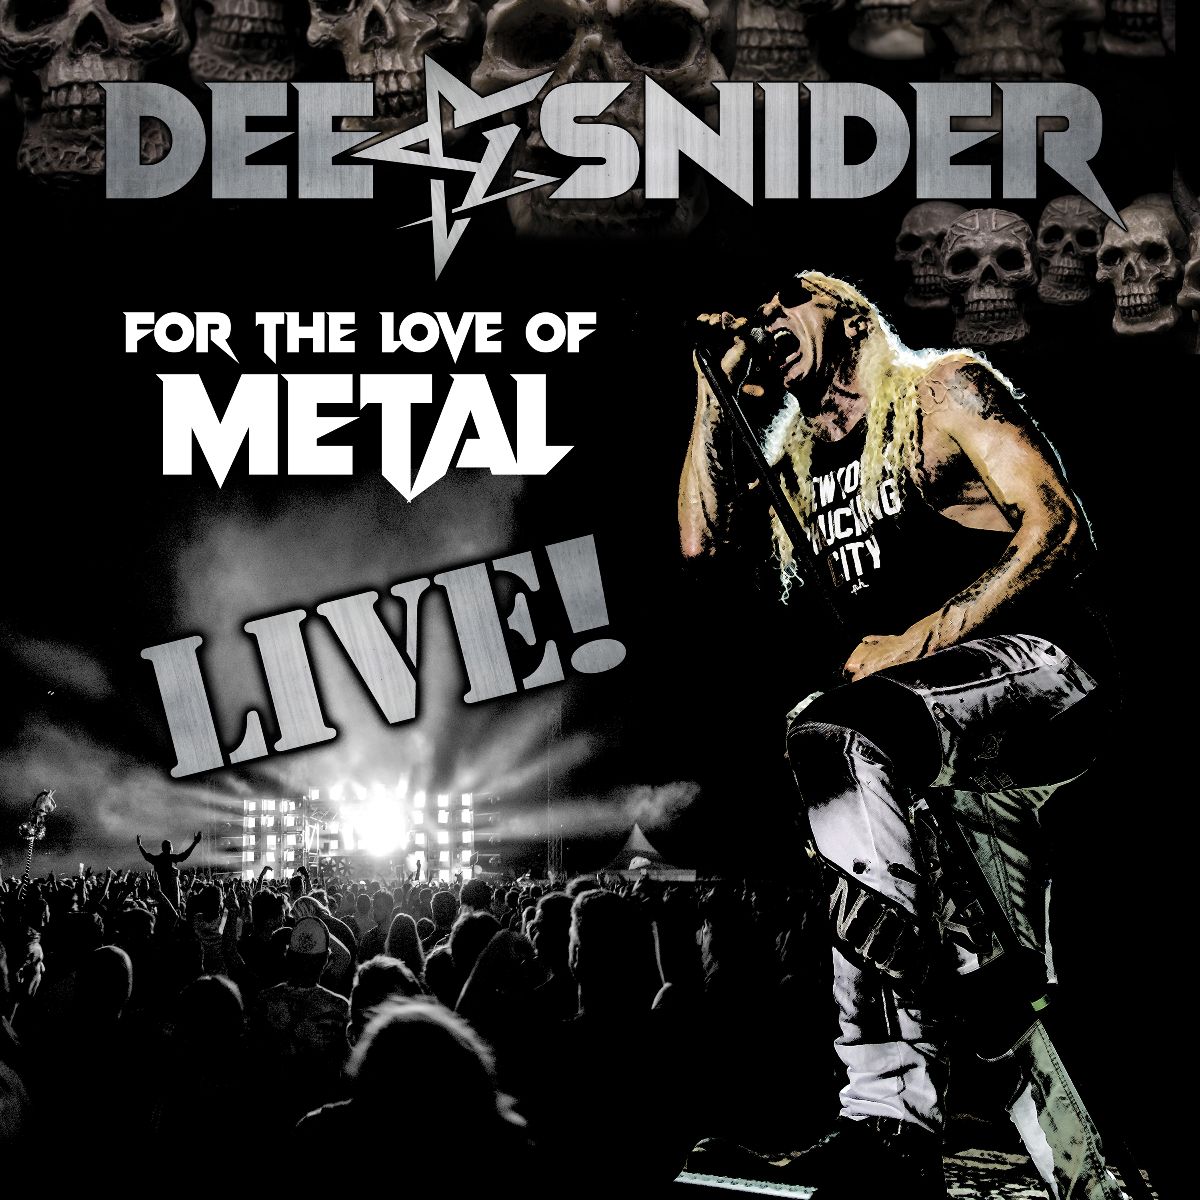 DEE SNIDER For The Love Of Metal Live